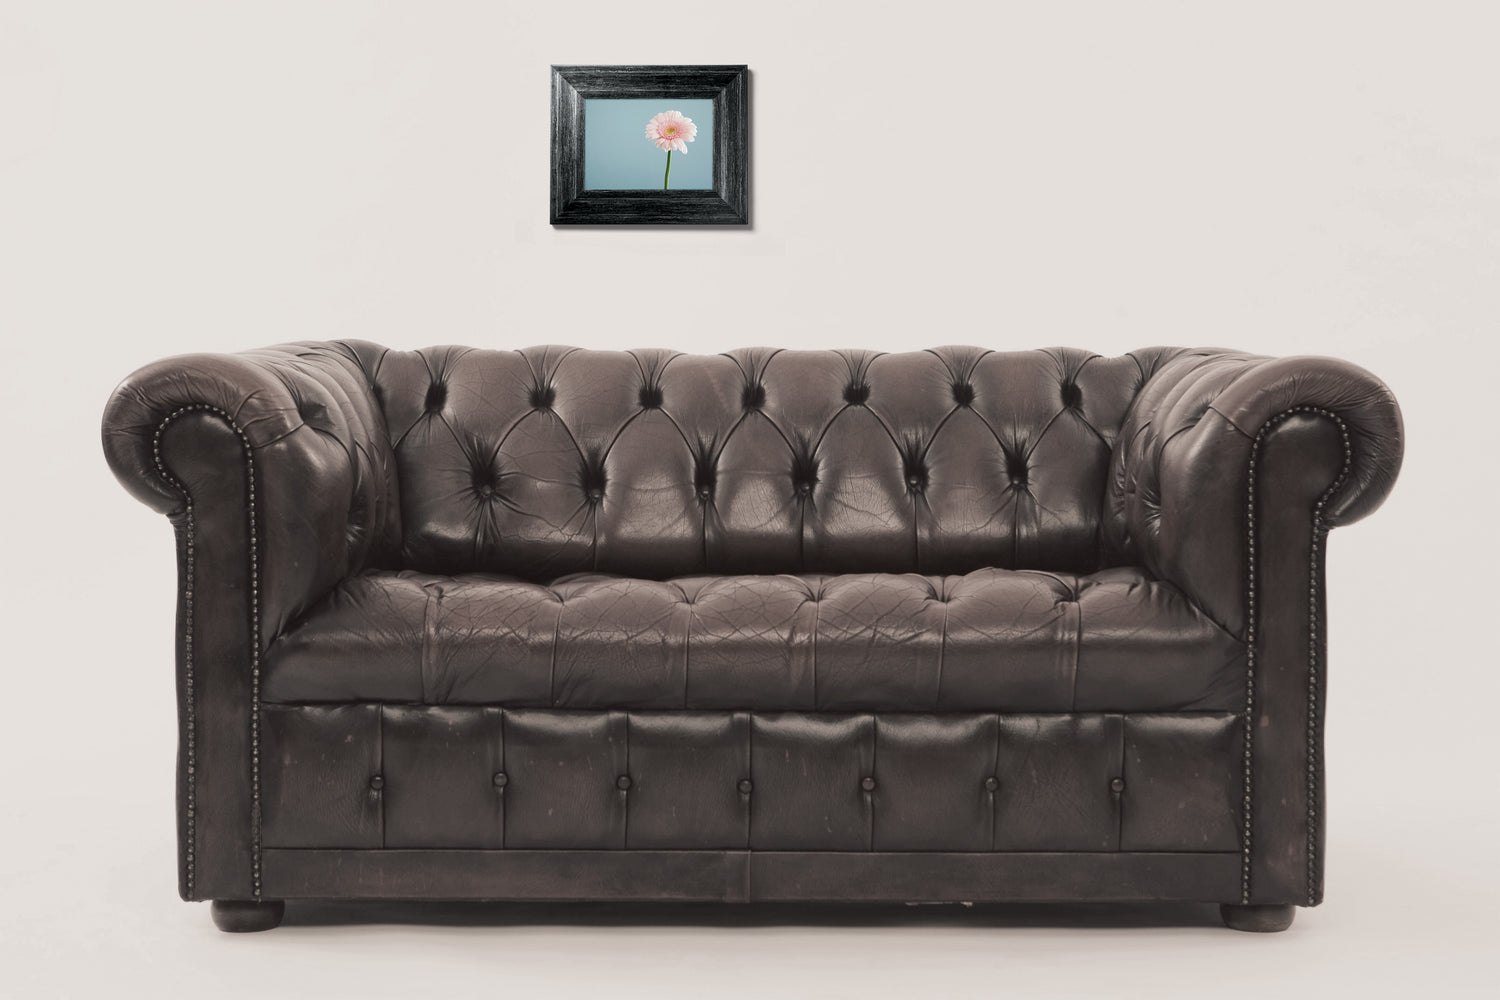 A leather sofa with a tiny framed picture hanging above it